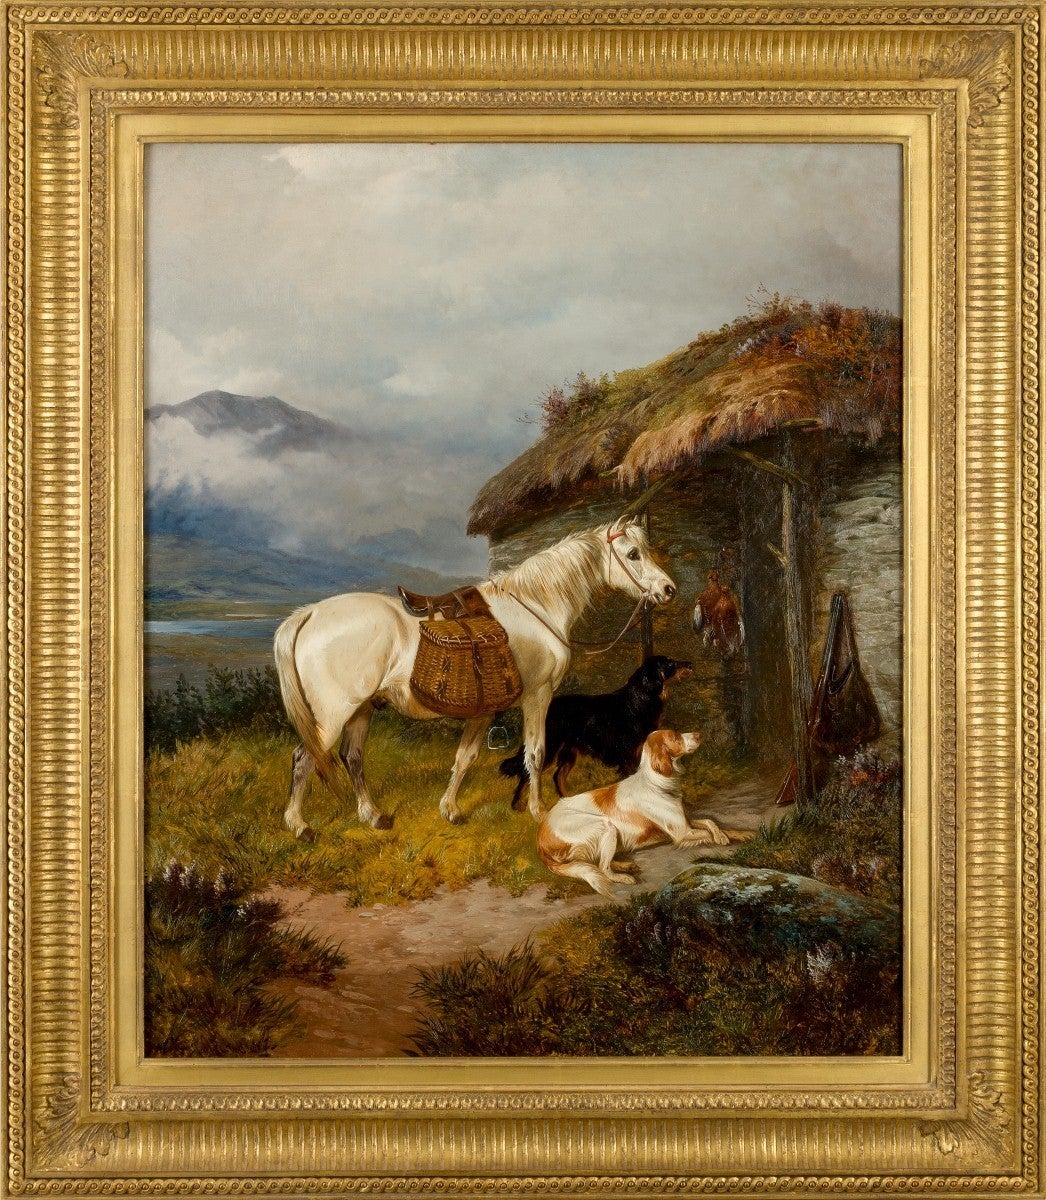 Oil on canvas by Colin Graeme (1858-1910) - Signed and dated: ‘Colin Graeme 1887’.

Colin Graeme Roe was from the Sheffield area and is thought to be the son of Robert Henry Roe. Roe signed his work both ‘Colin Graeme Roe’ and ‘Colin Graeme’. A